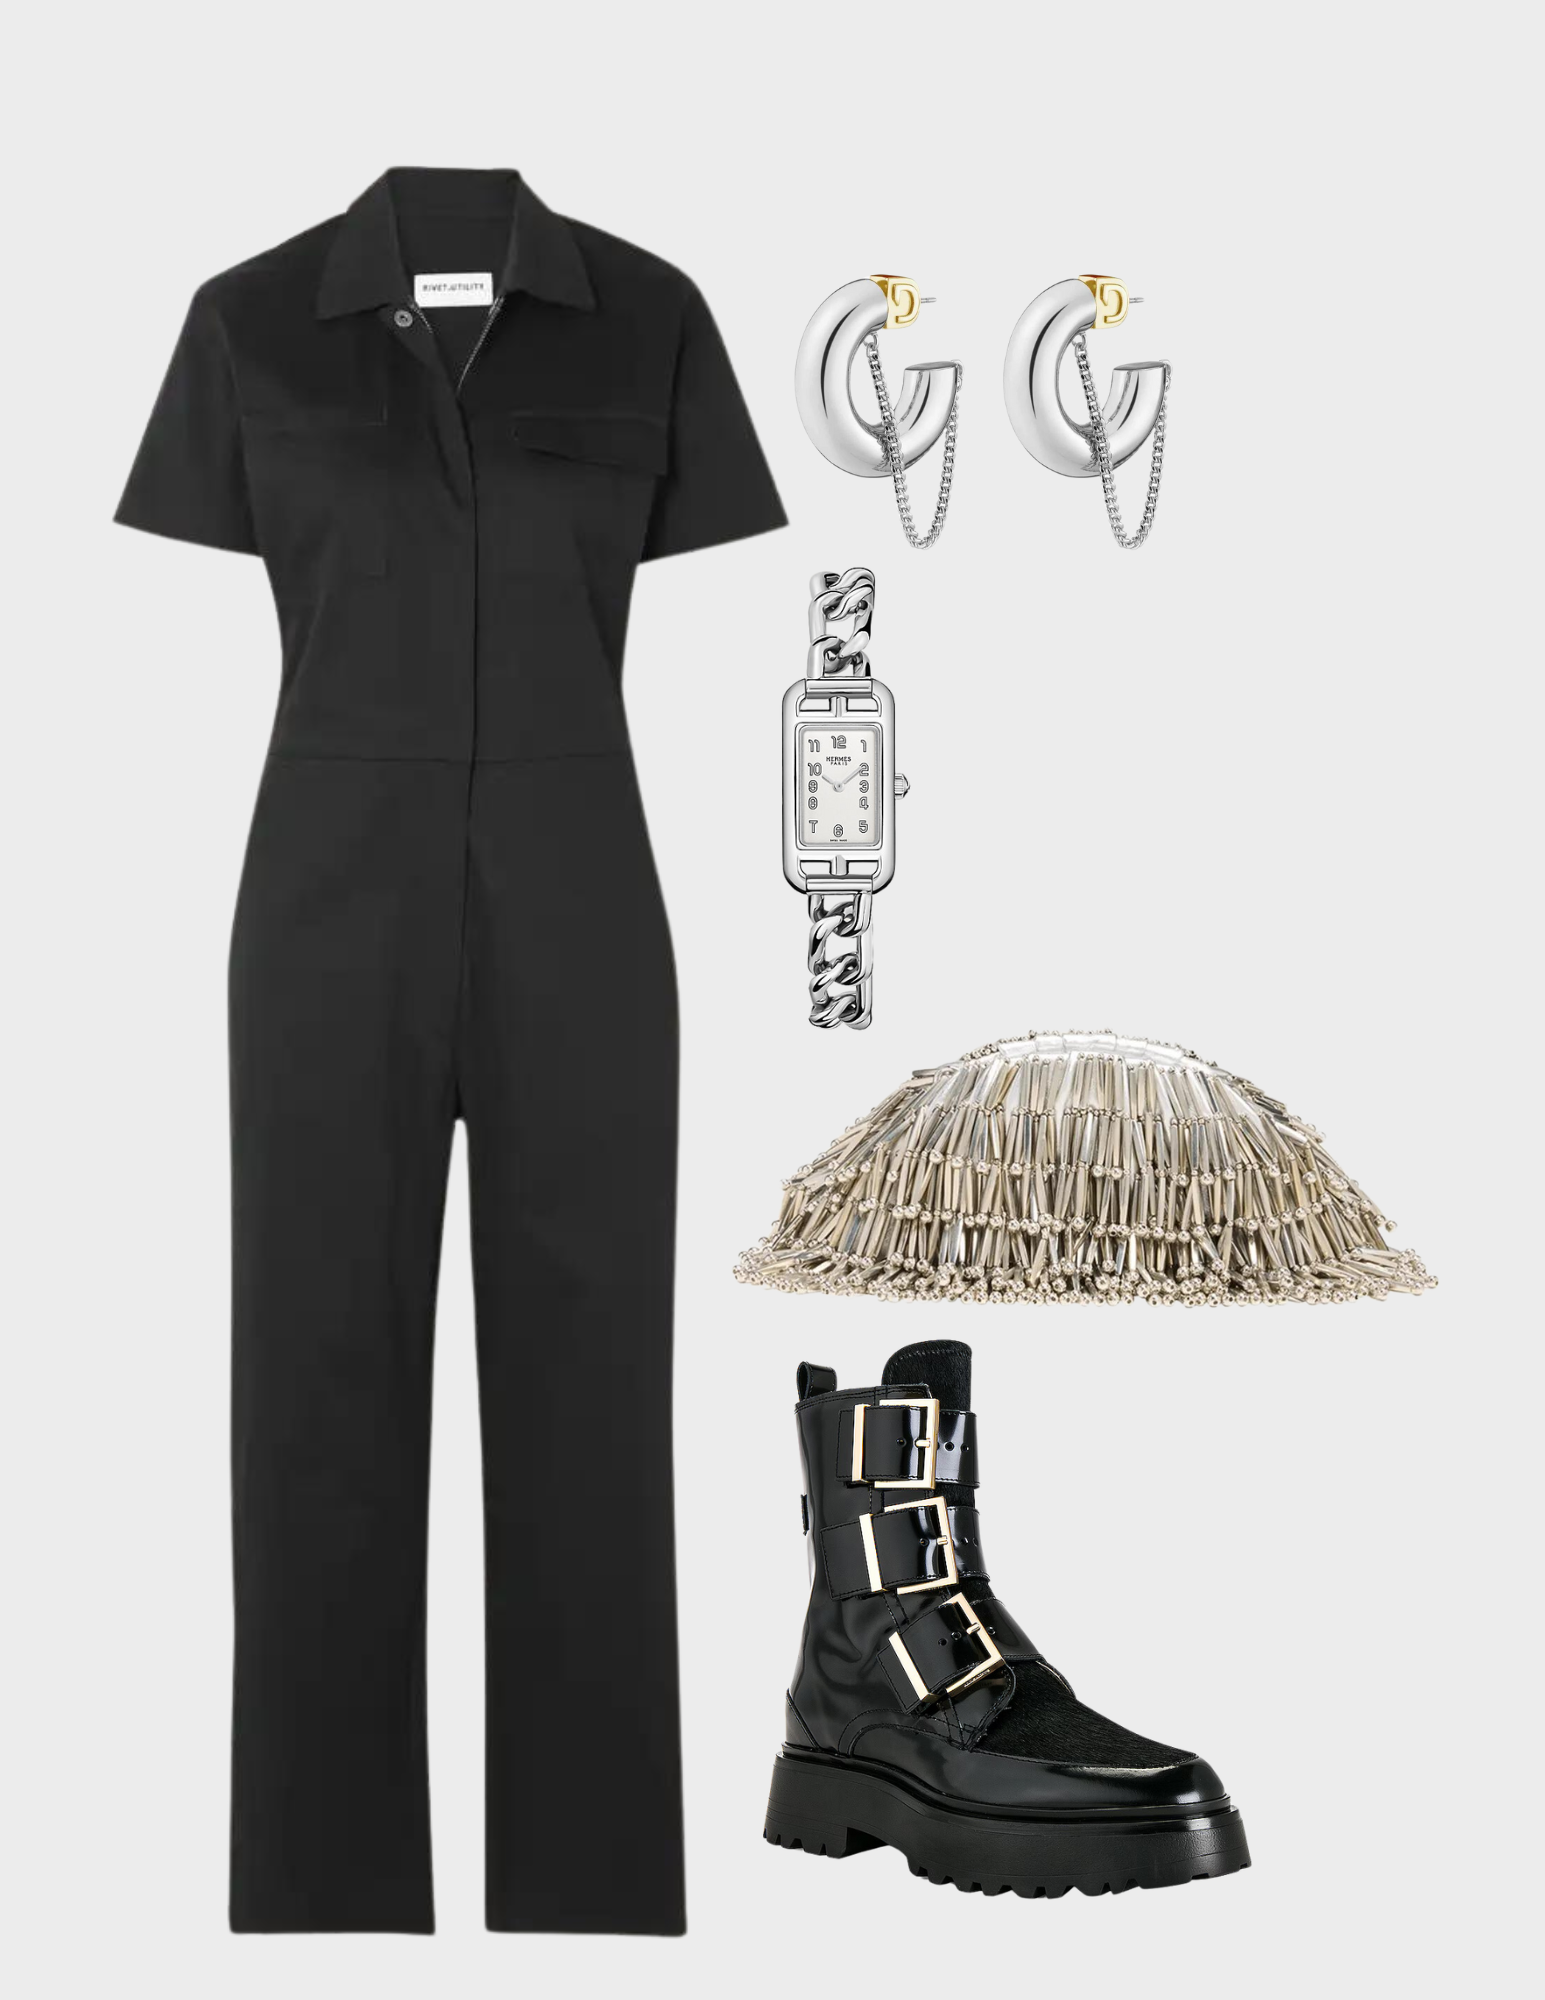 Discover Your Look: The 'Worker' Jumpsuit – The Must-Have Jumpsuit You Can Dress Up or Down!